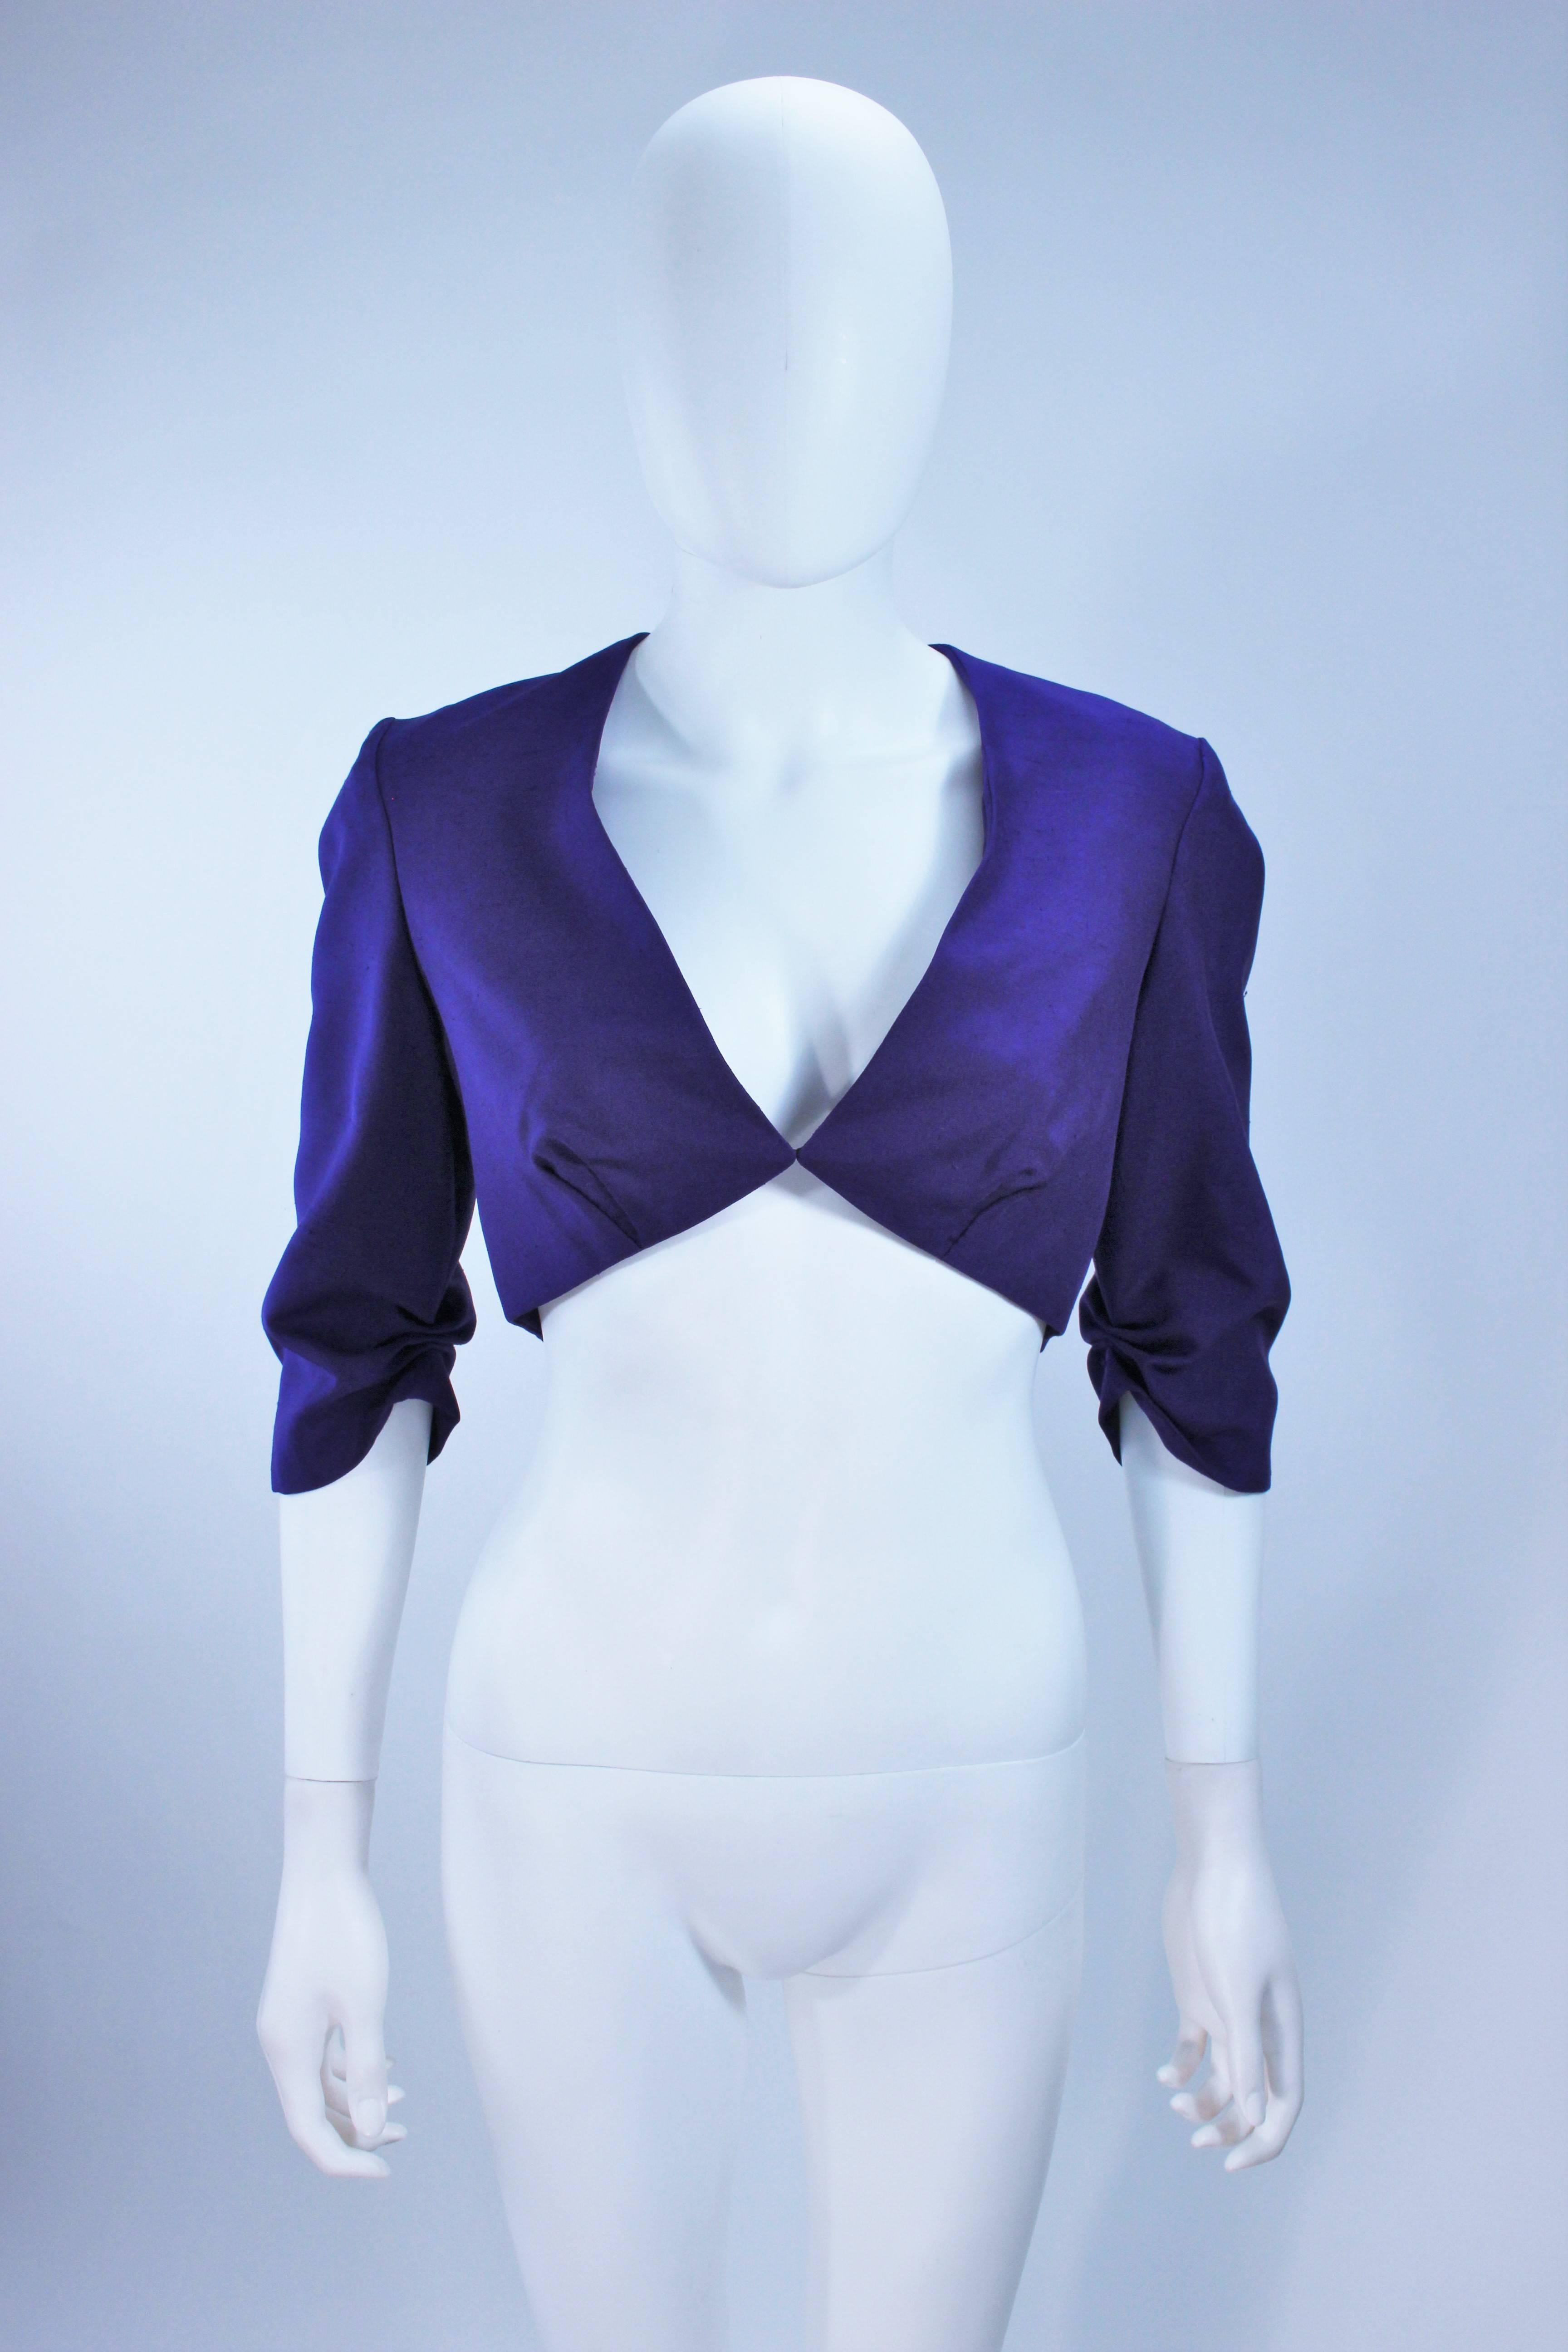 This Elizabeth Mason Couture jacket  is composed of a fine purple silk and features a center front hook & eye closure with a darted design. Made in Beverly Hills. 

This is a couture custom order. Please allow for a 60 day lead time from